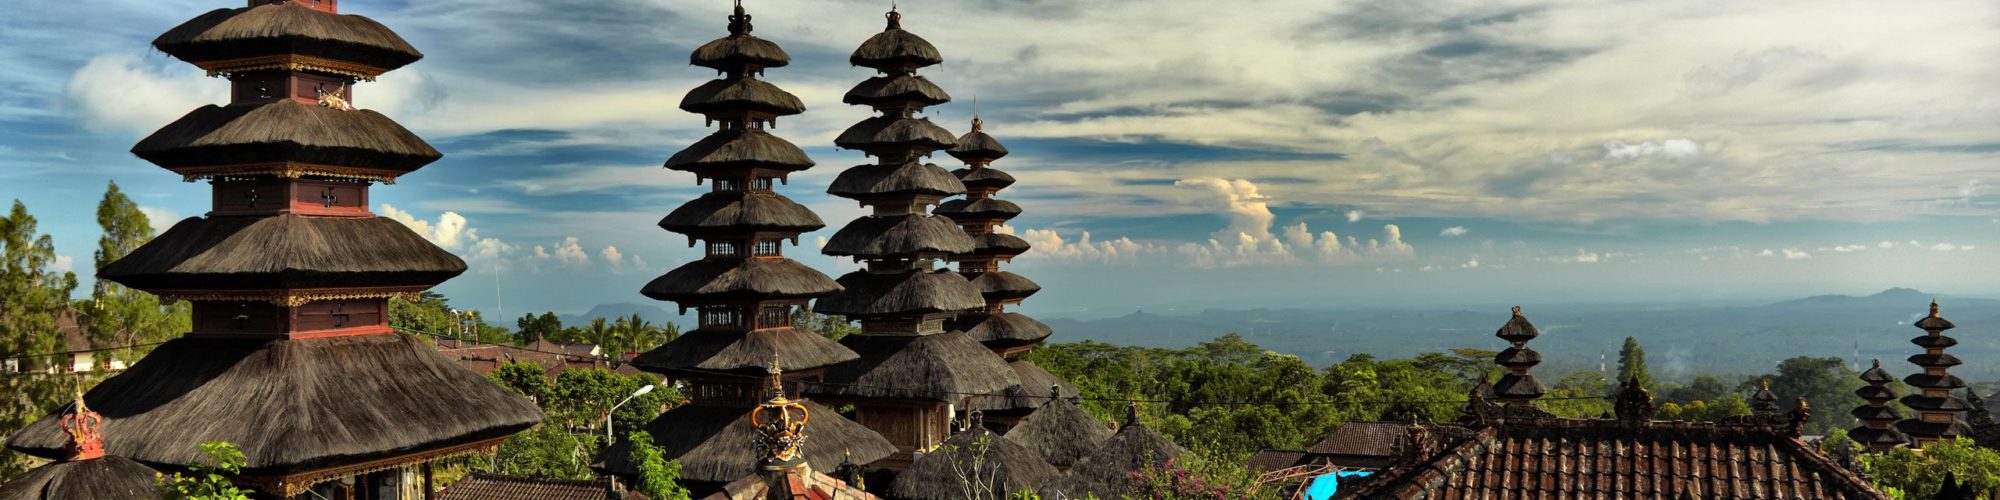 Manggis travel agents packages deals